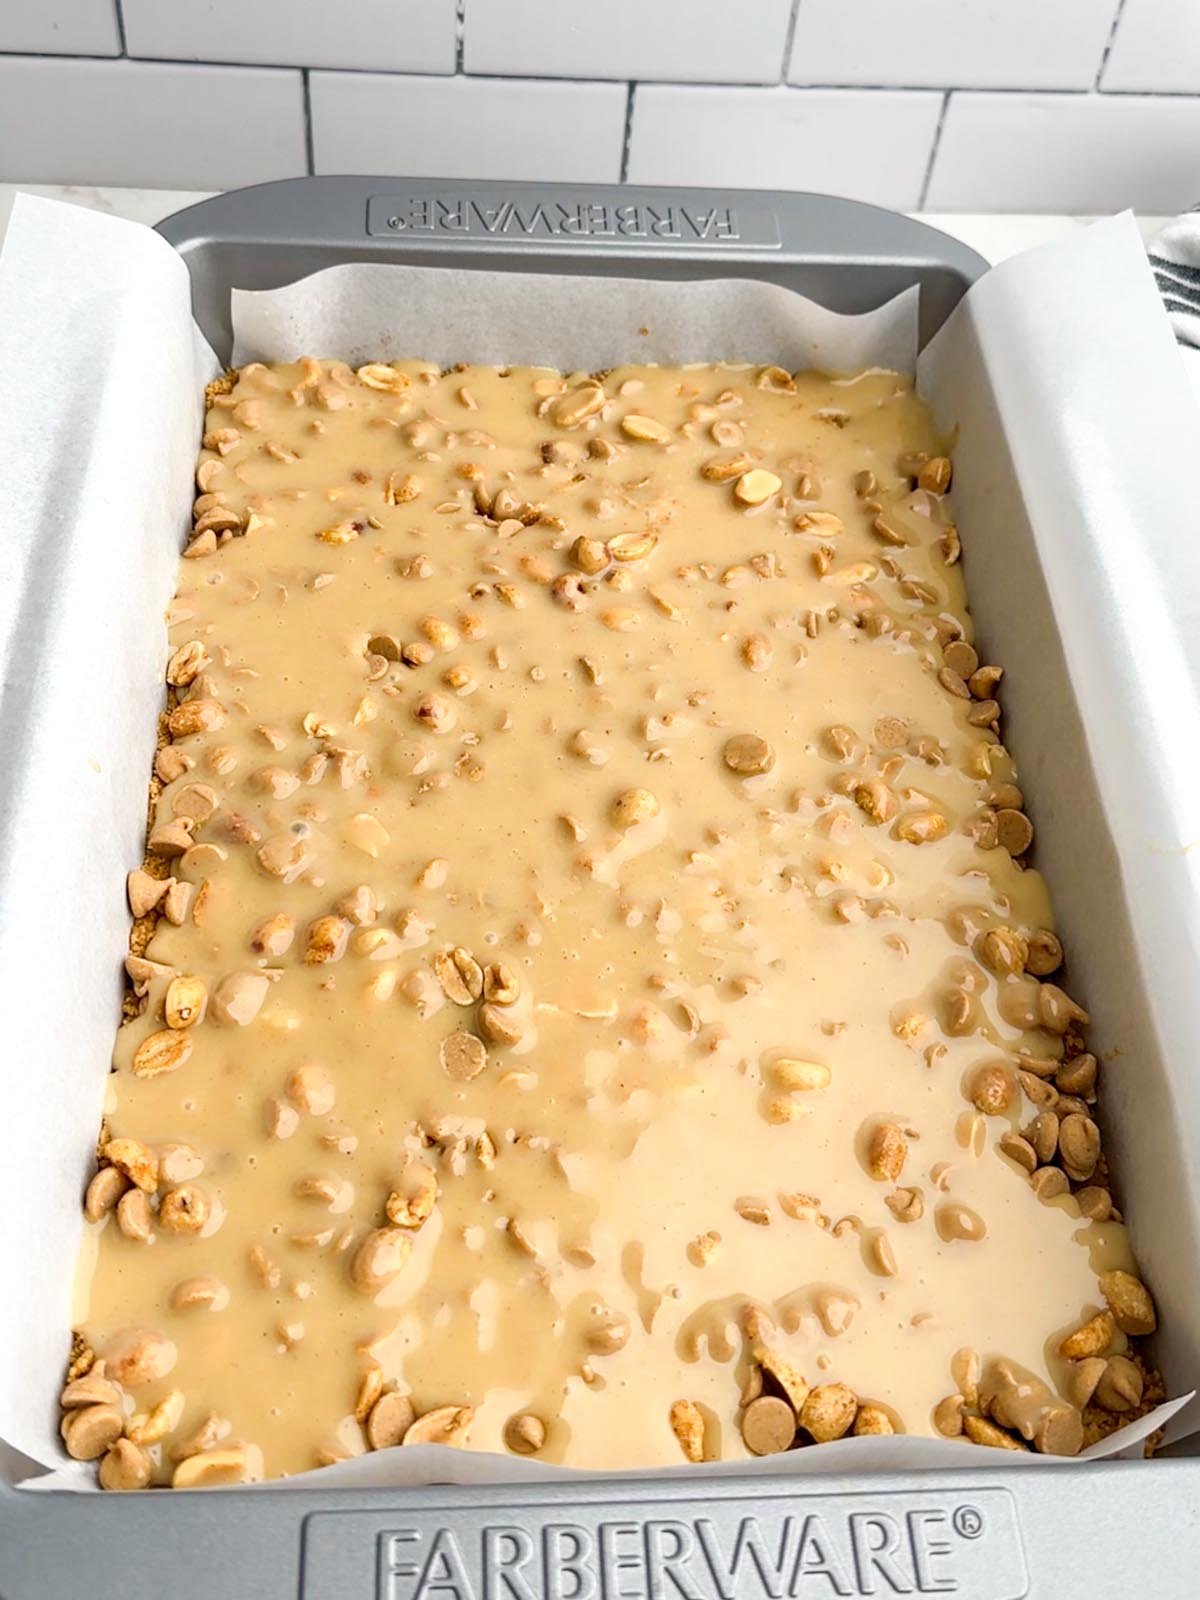 Peanut butter condensed milk layered over peanuts and peanut butter chips in a baking pan.